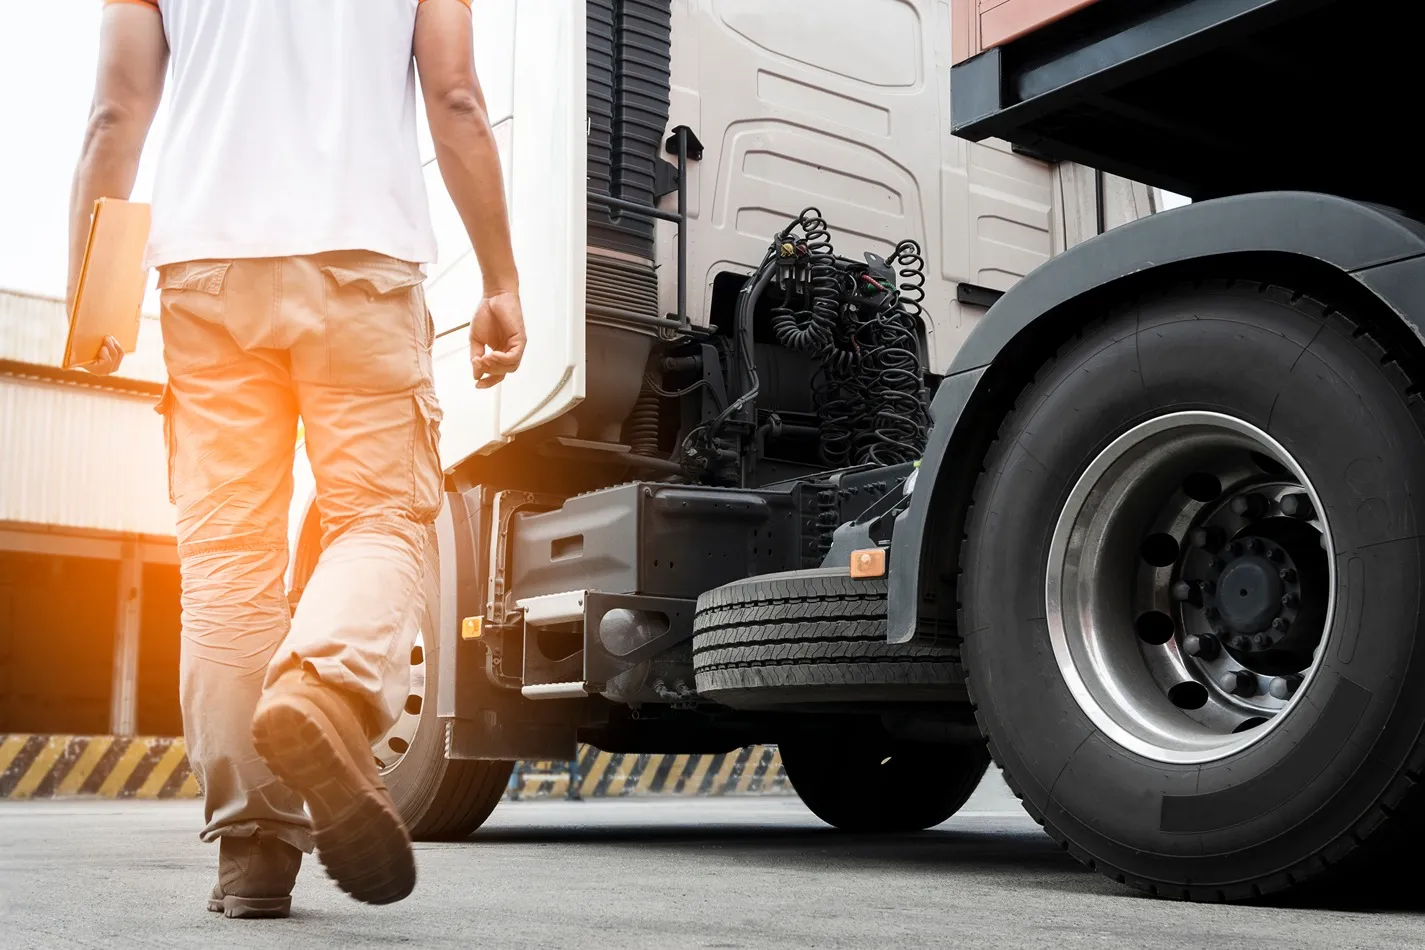 Big Rig Truck Accident Lawyers: Your Guide to Legal Help and Justice